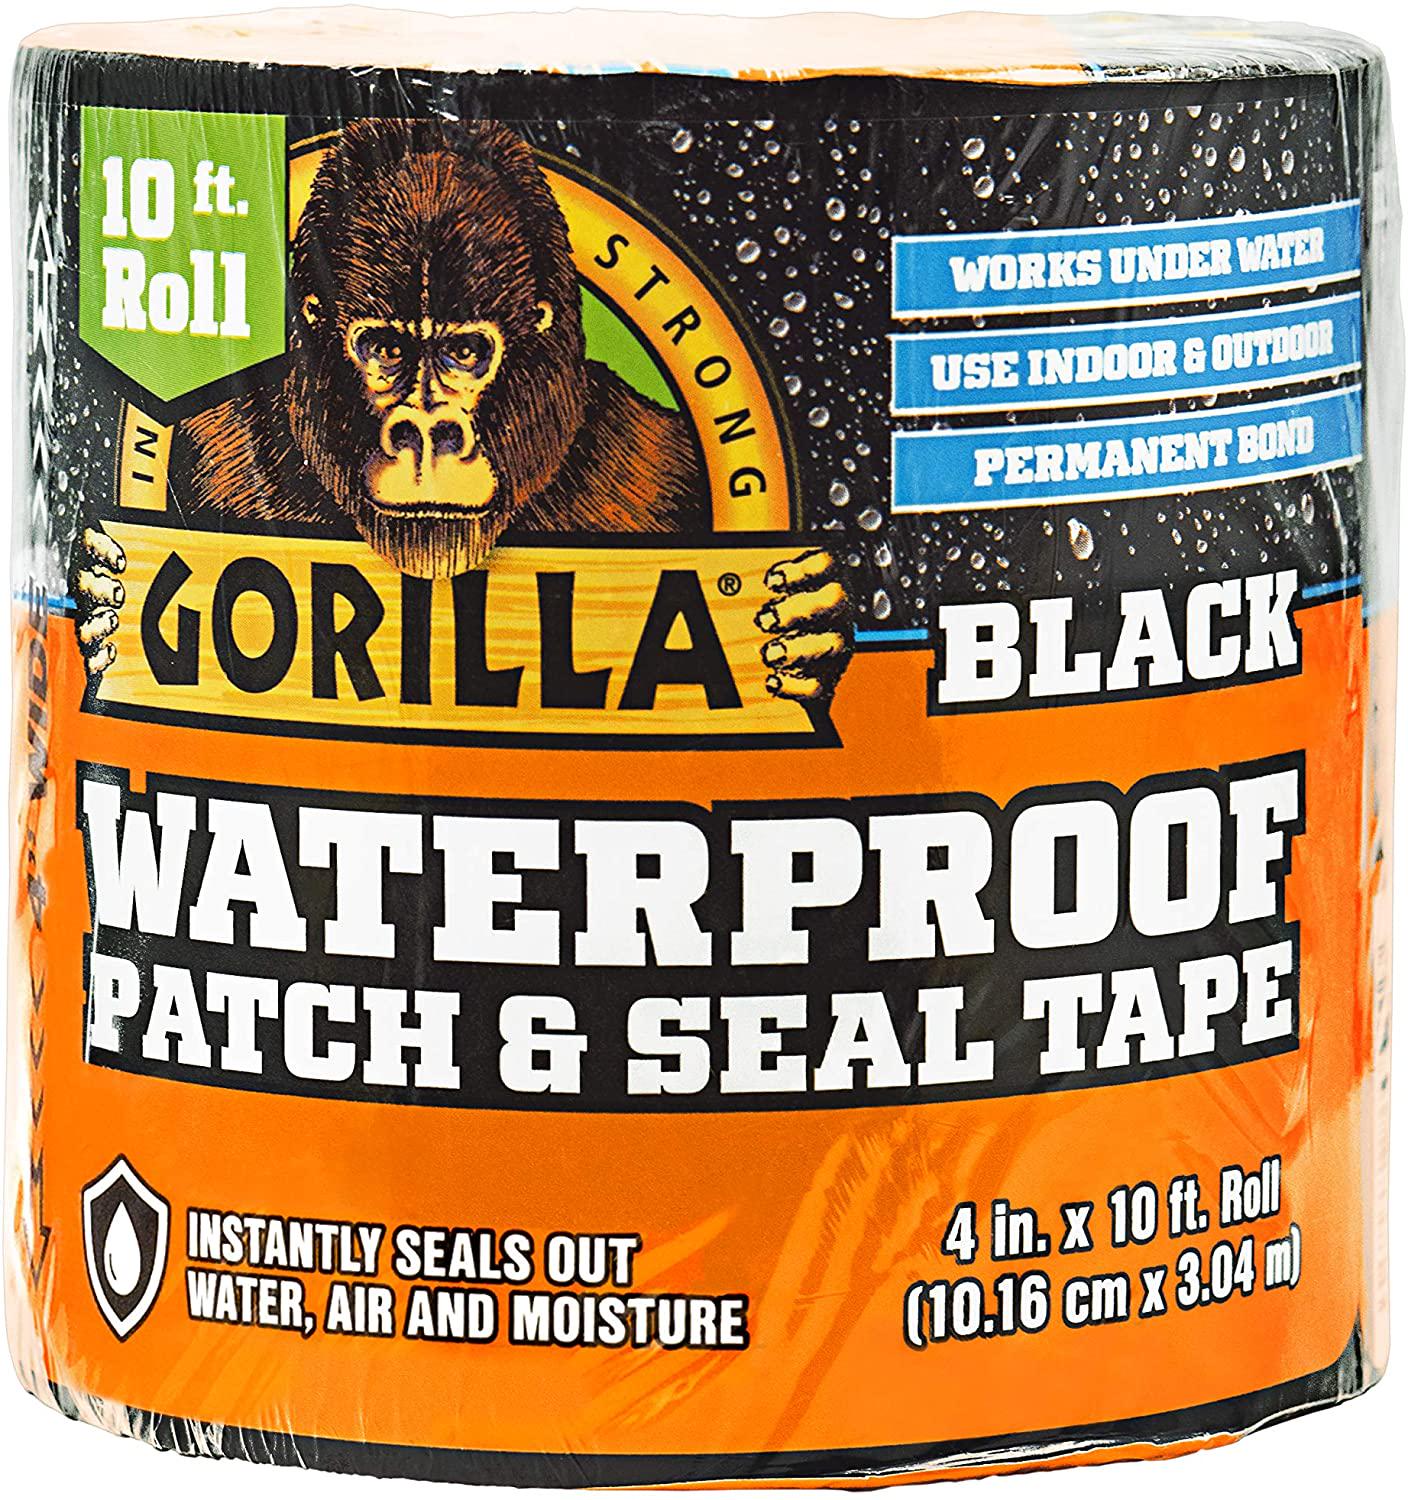 Gorilla, Gorilla 105489 Combo Waterproof Patch and Seal Tape, Black and White, 2 Pack